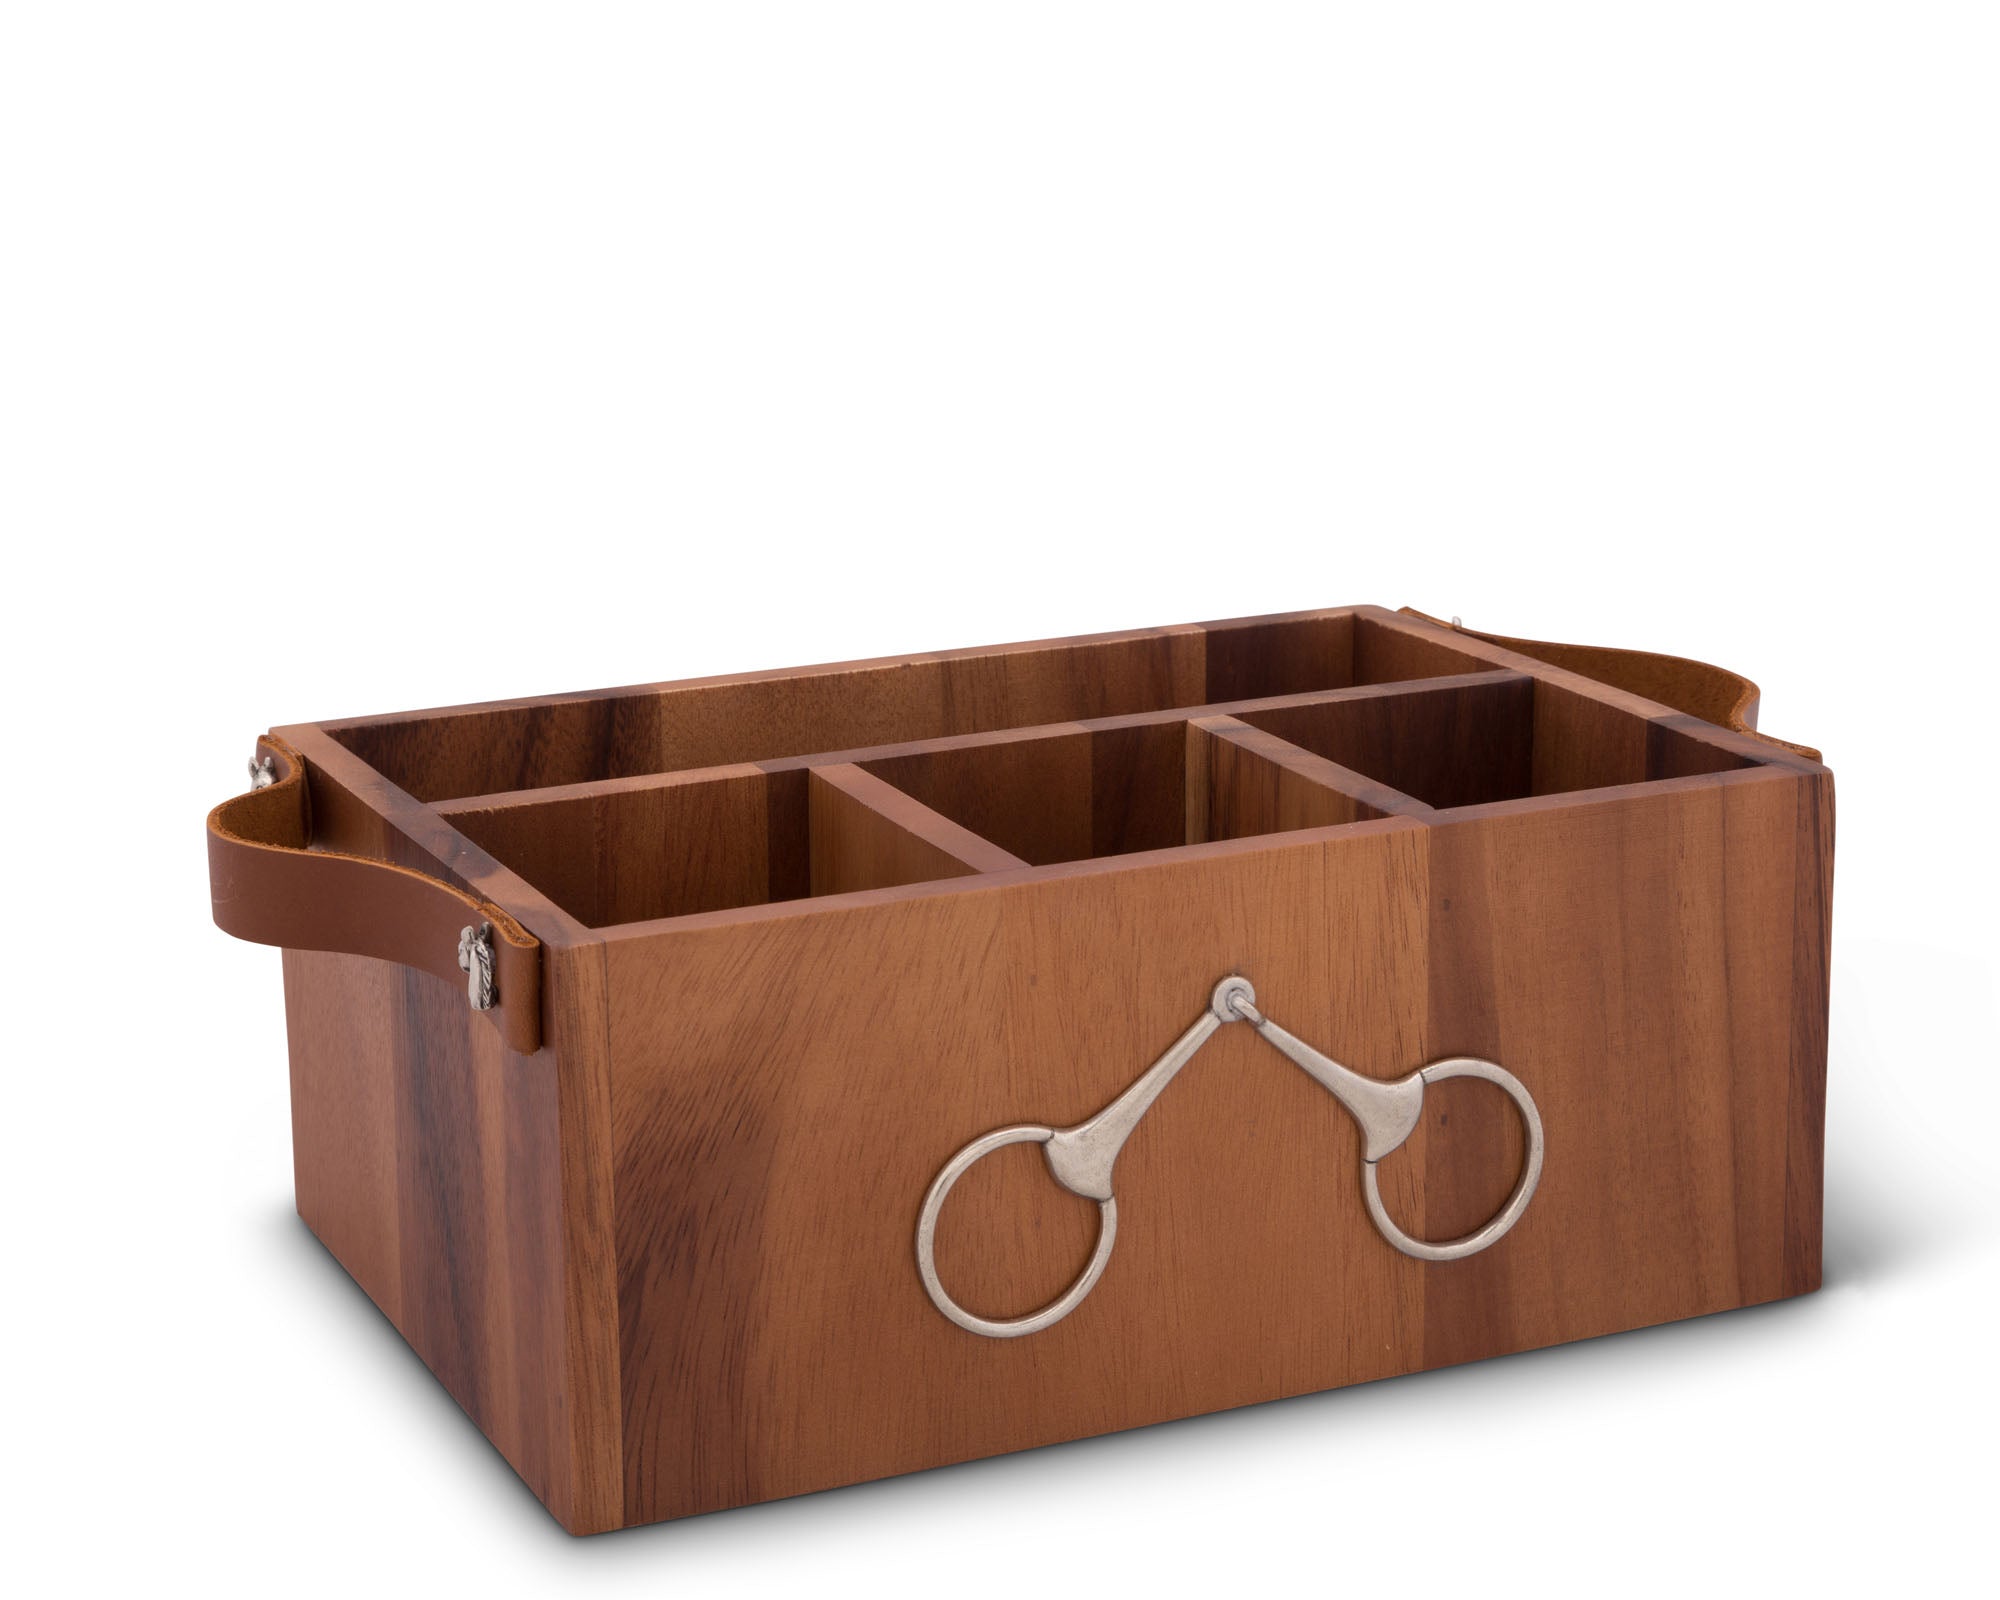 Vagabond House Horse Bits Leather Handles Flatware Caddy Product Image